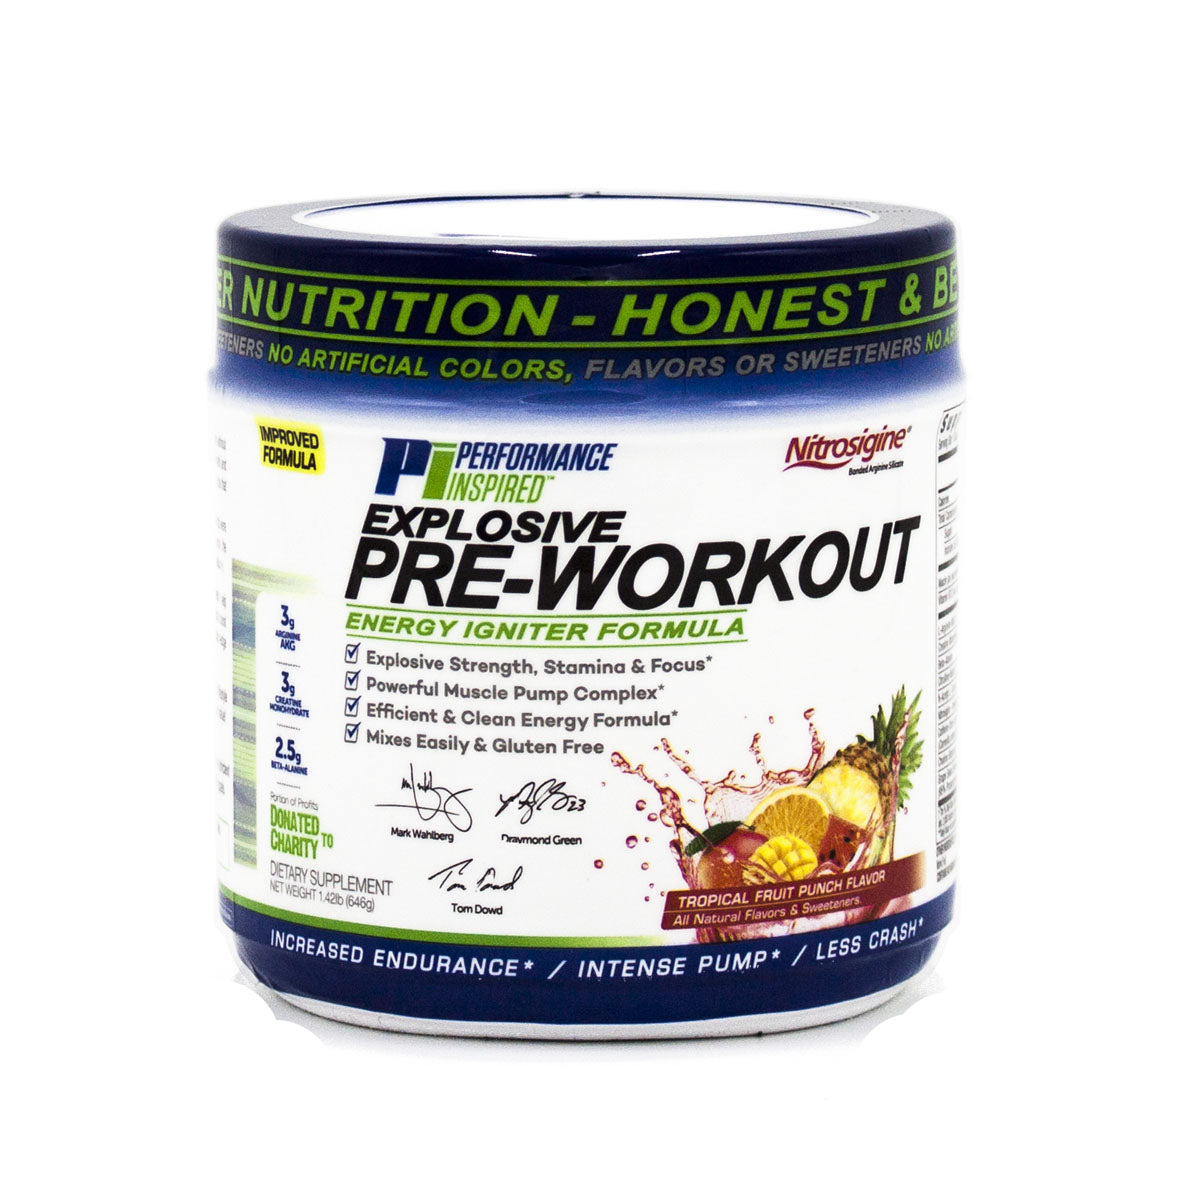 Performance Inspired Explosive Pre-Workout Energy Formula